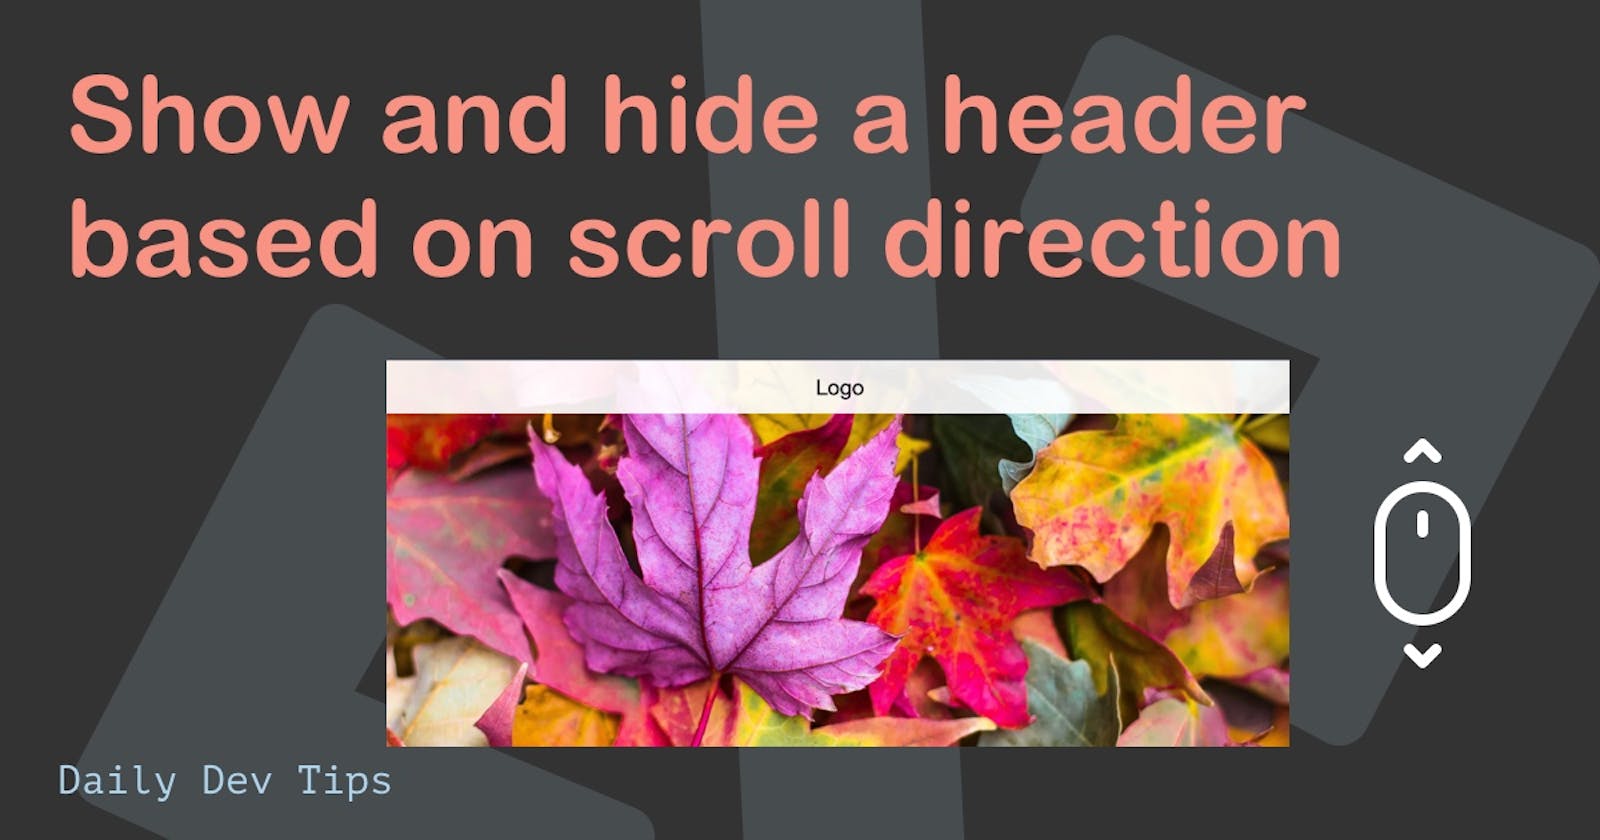 Show and hide a header based on scroll direction